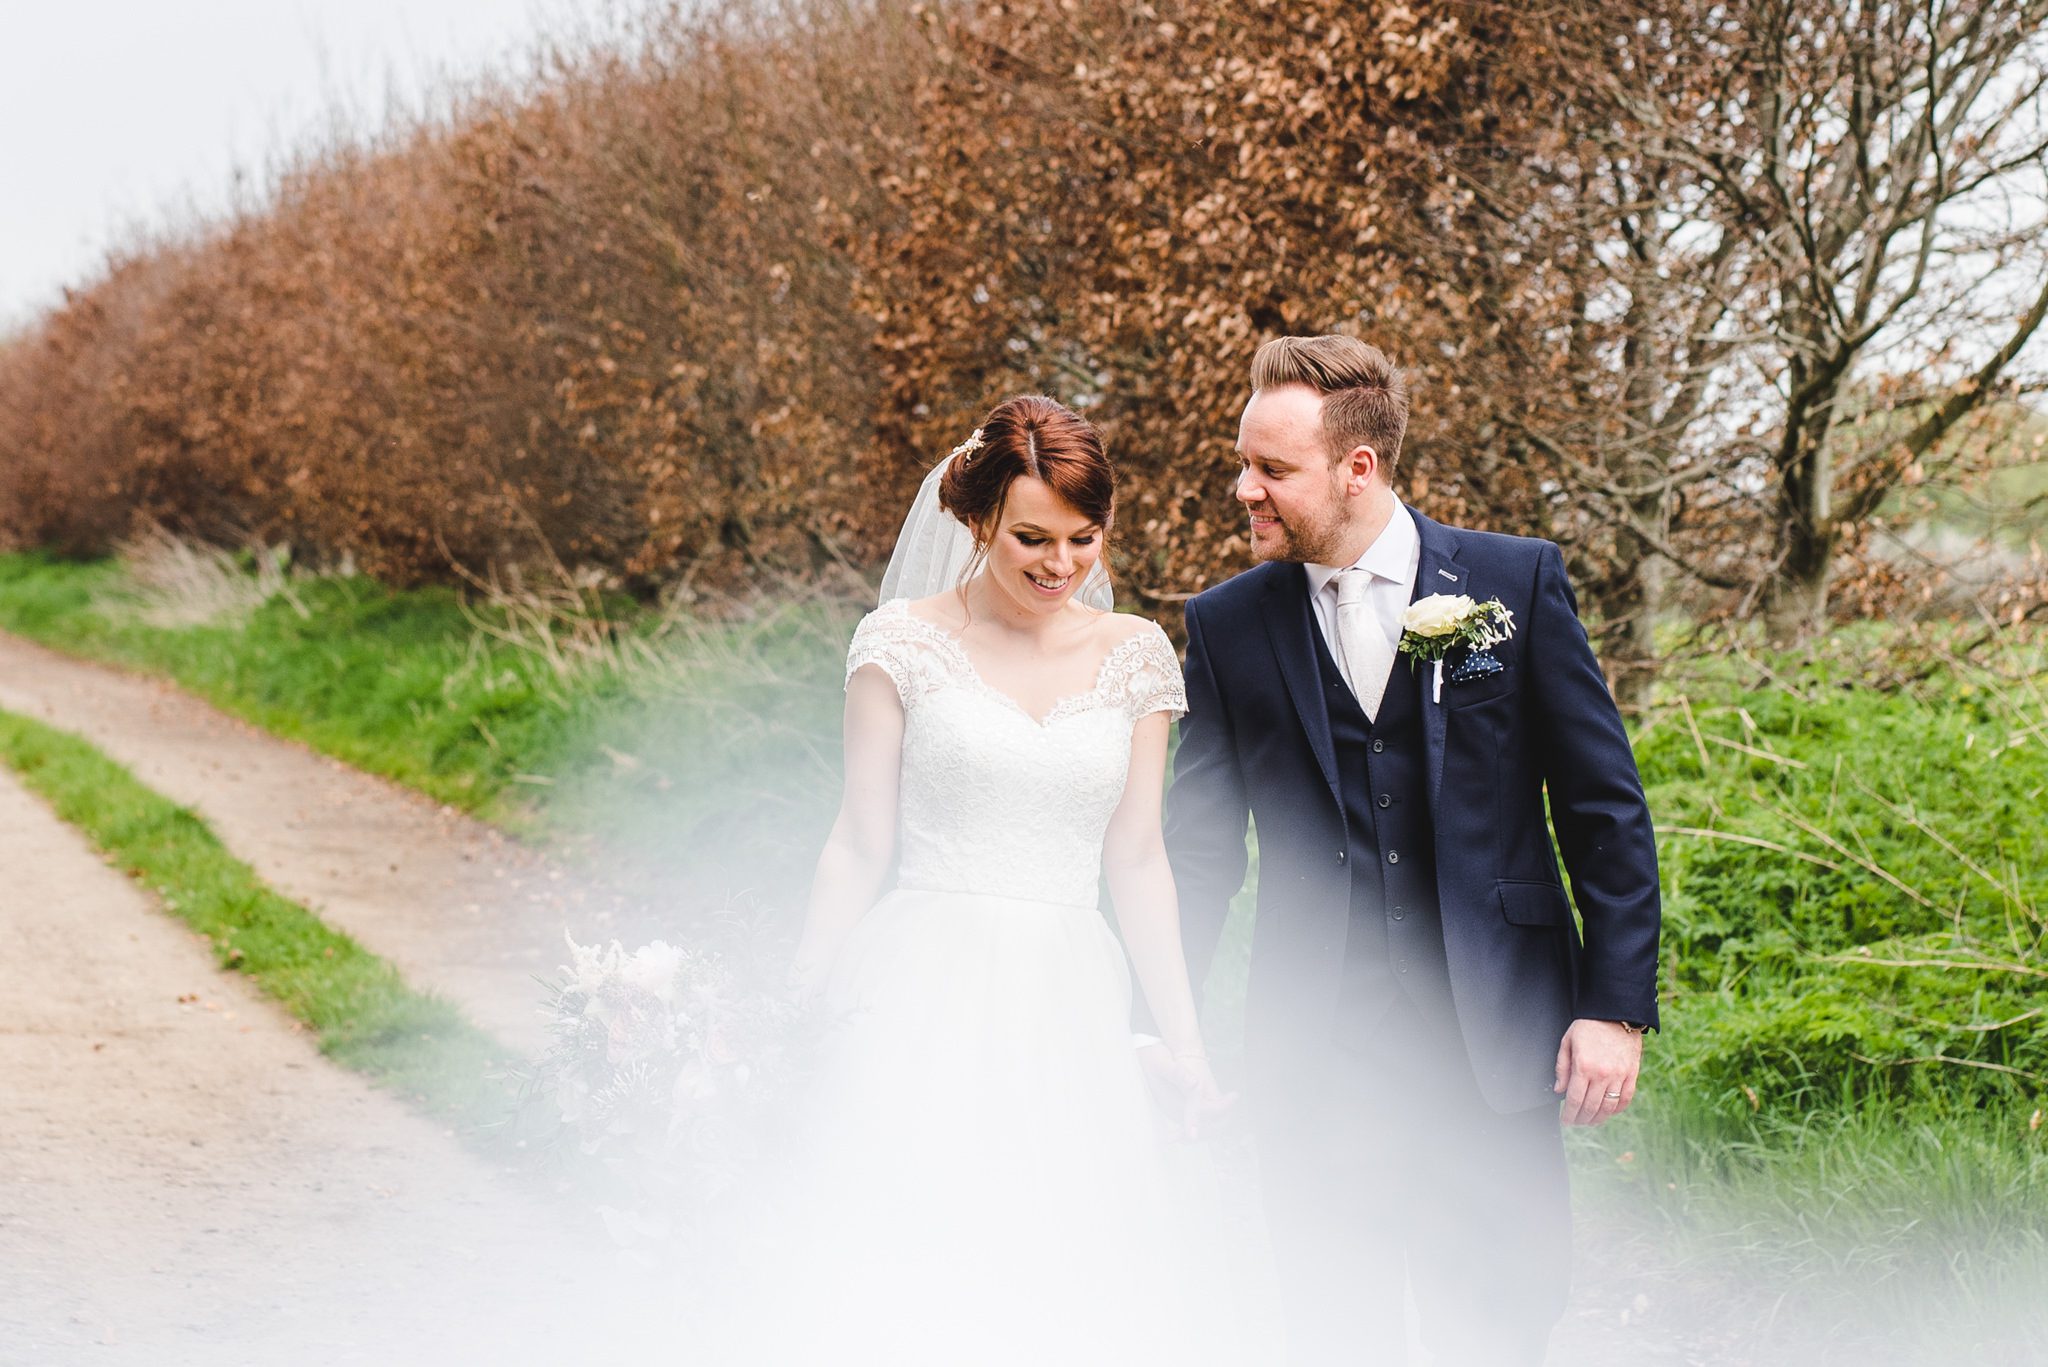 A newly married couple walking in Tetbury